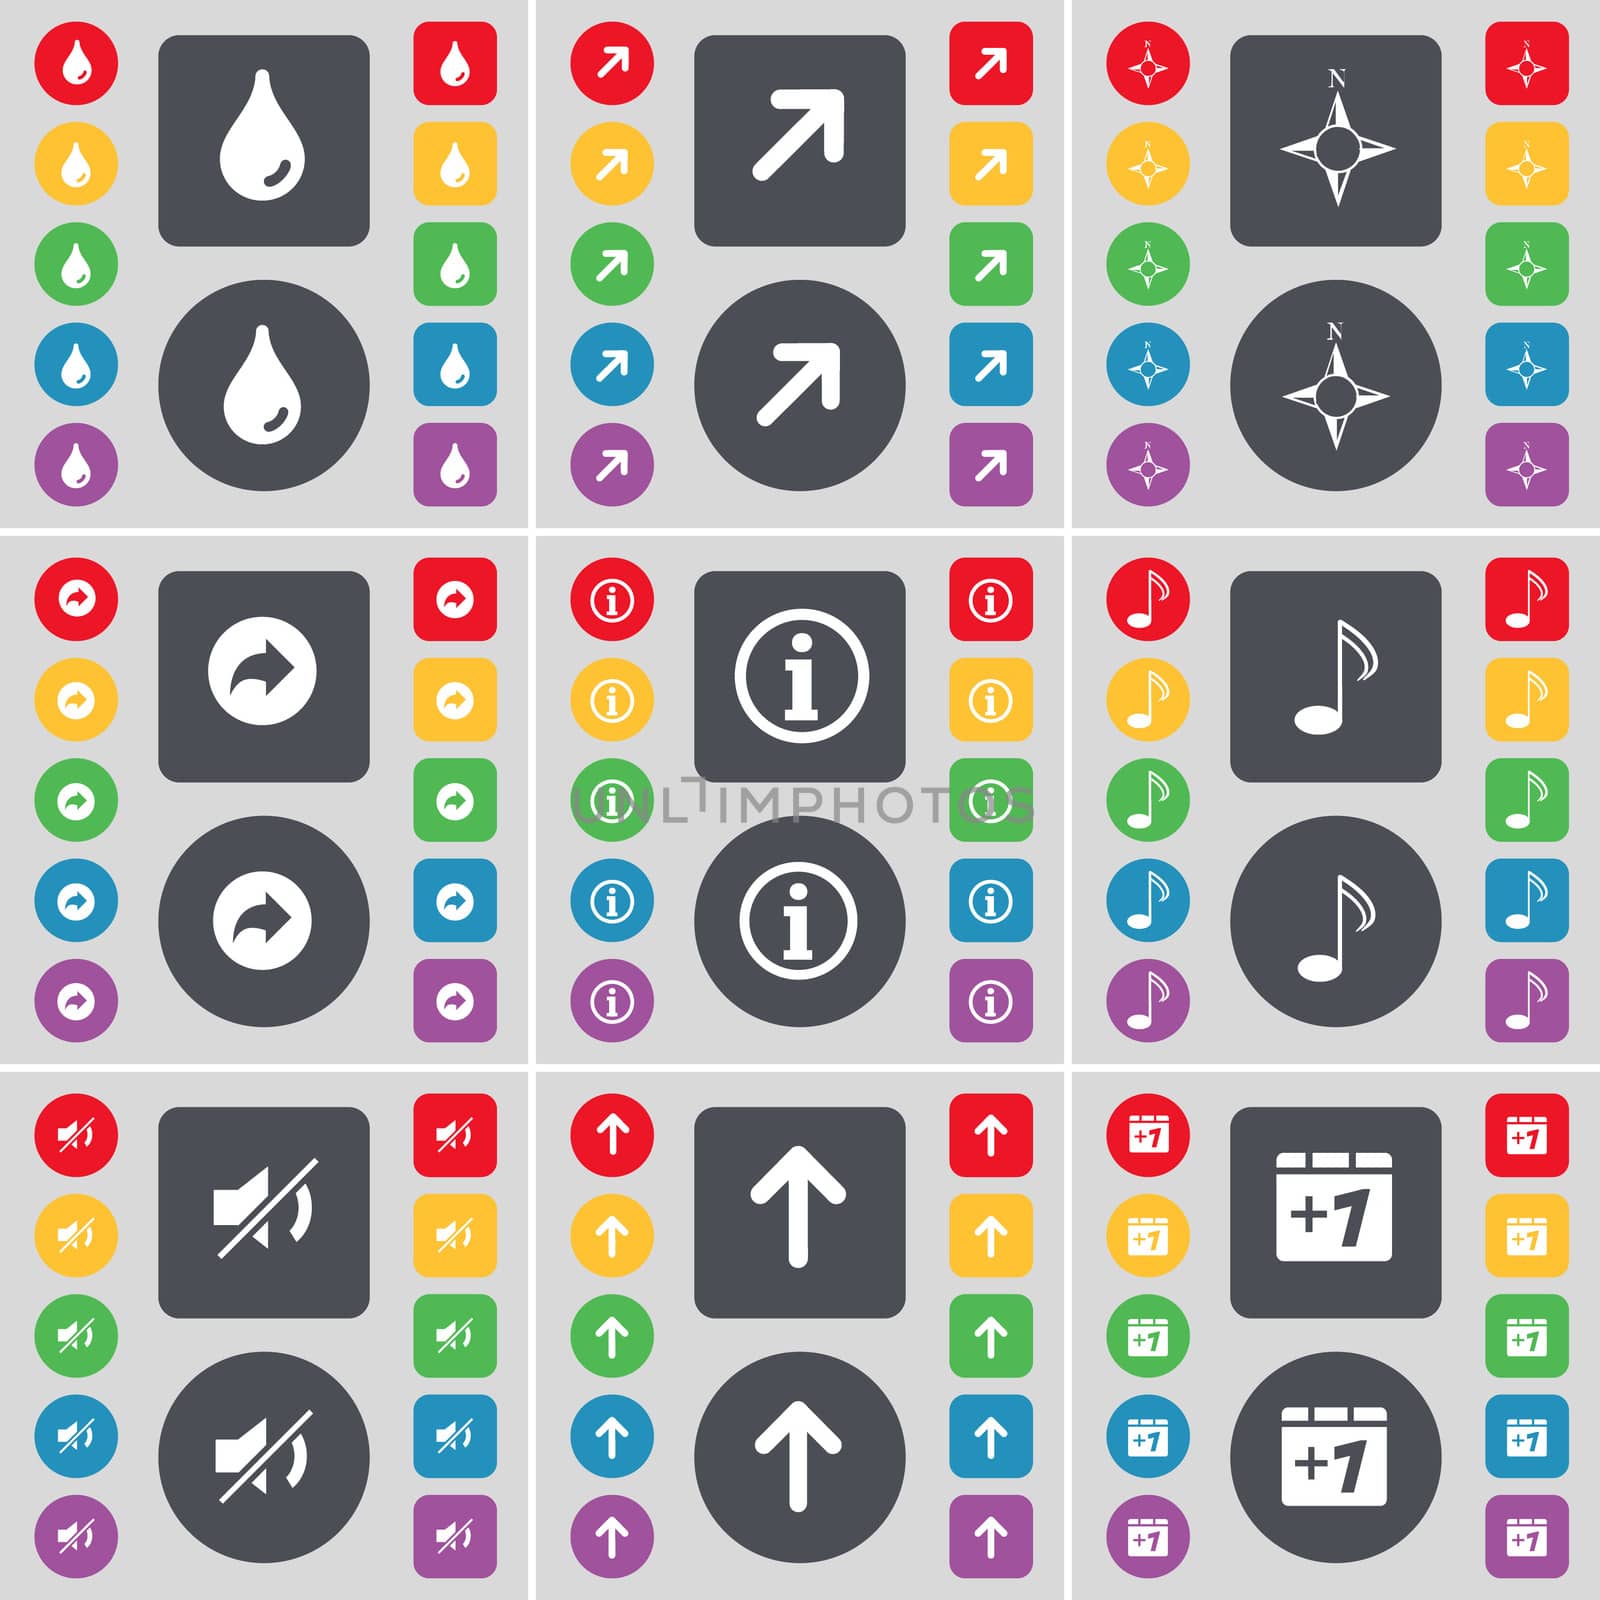 Drop, Full screen, Compass, Back, Information, Note, Mute, Arrow up, Plus one icon symbol. A large set of flat, colored buttons for your design.  by serhii_lohvyniuk